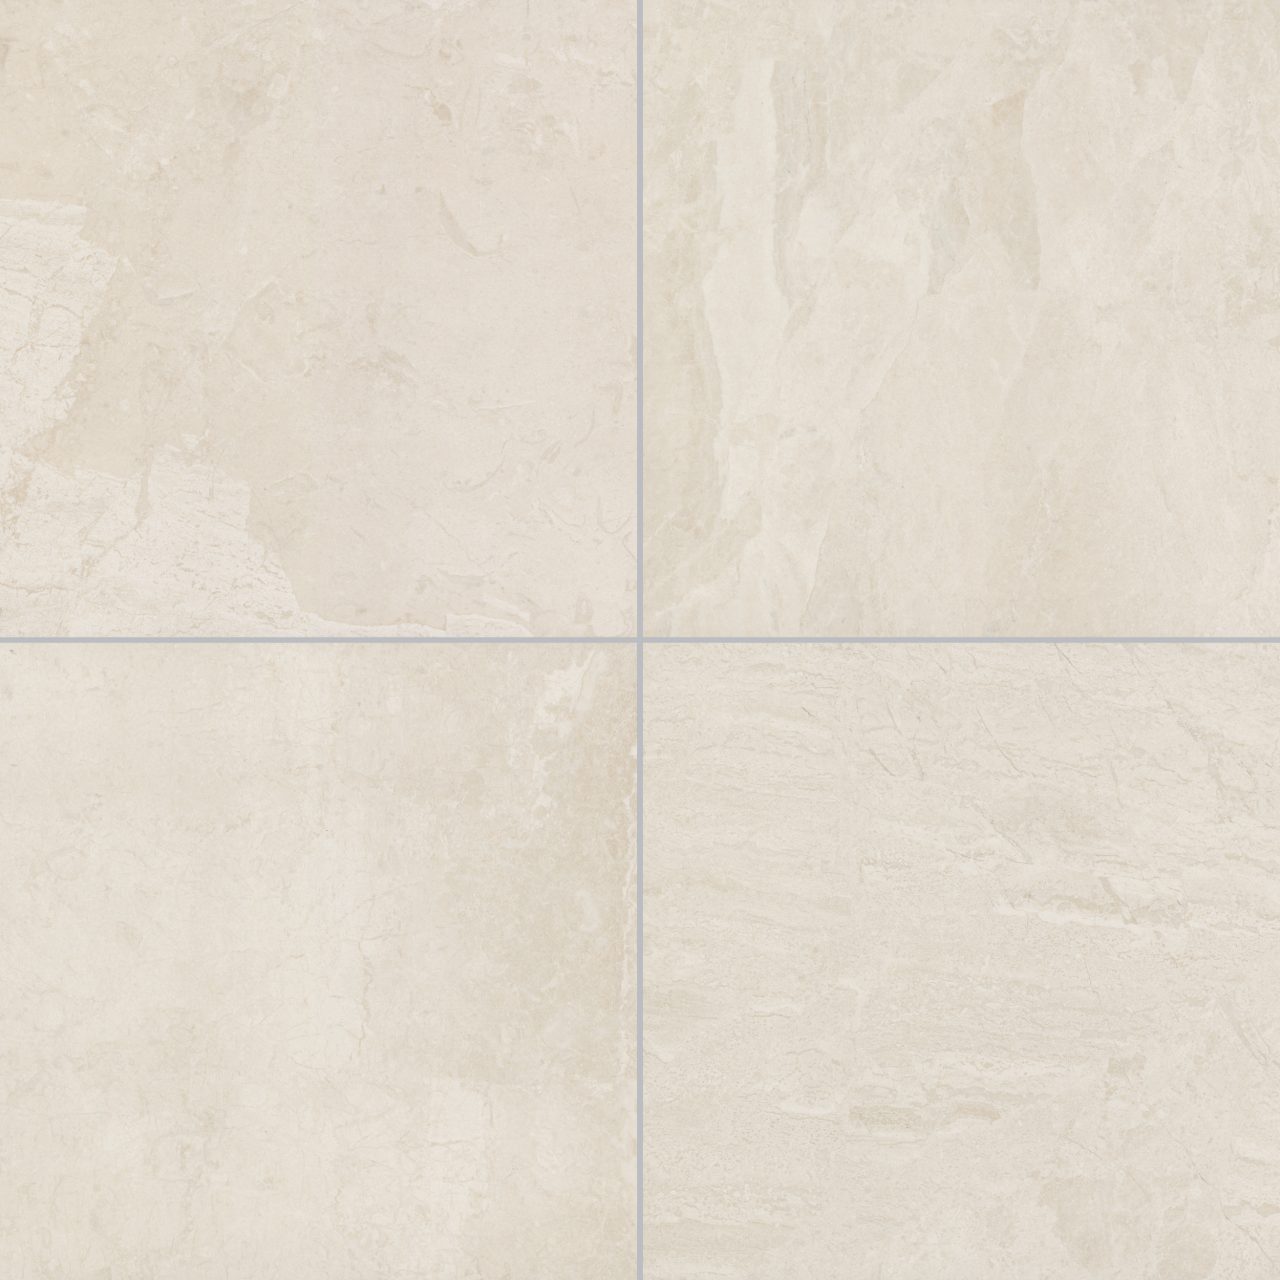 Bianco Marblano Porcelain Pool Tiles And Coping. Outdoor Paving Tiles